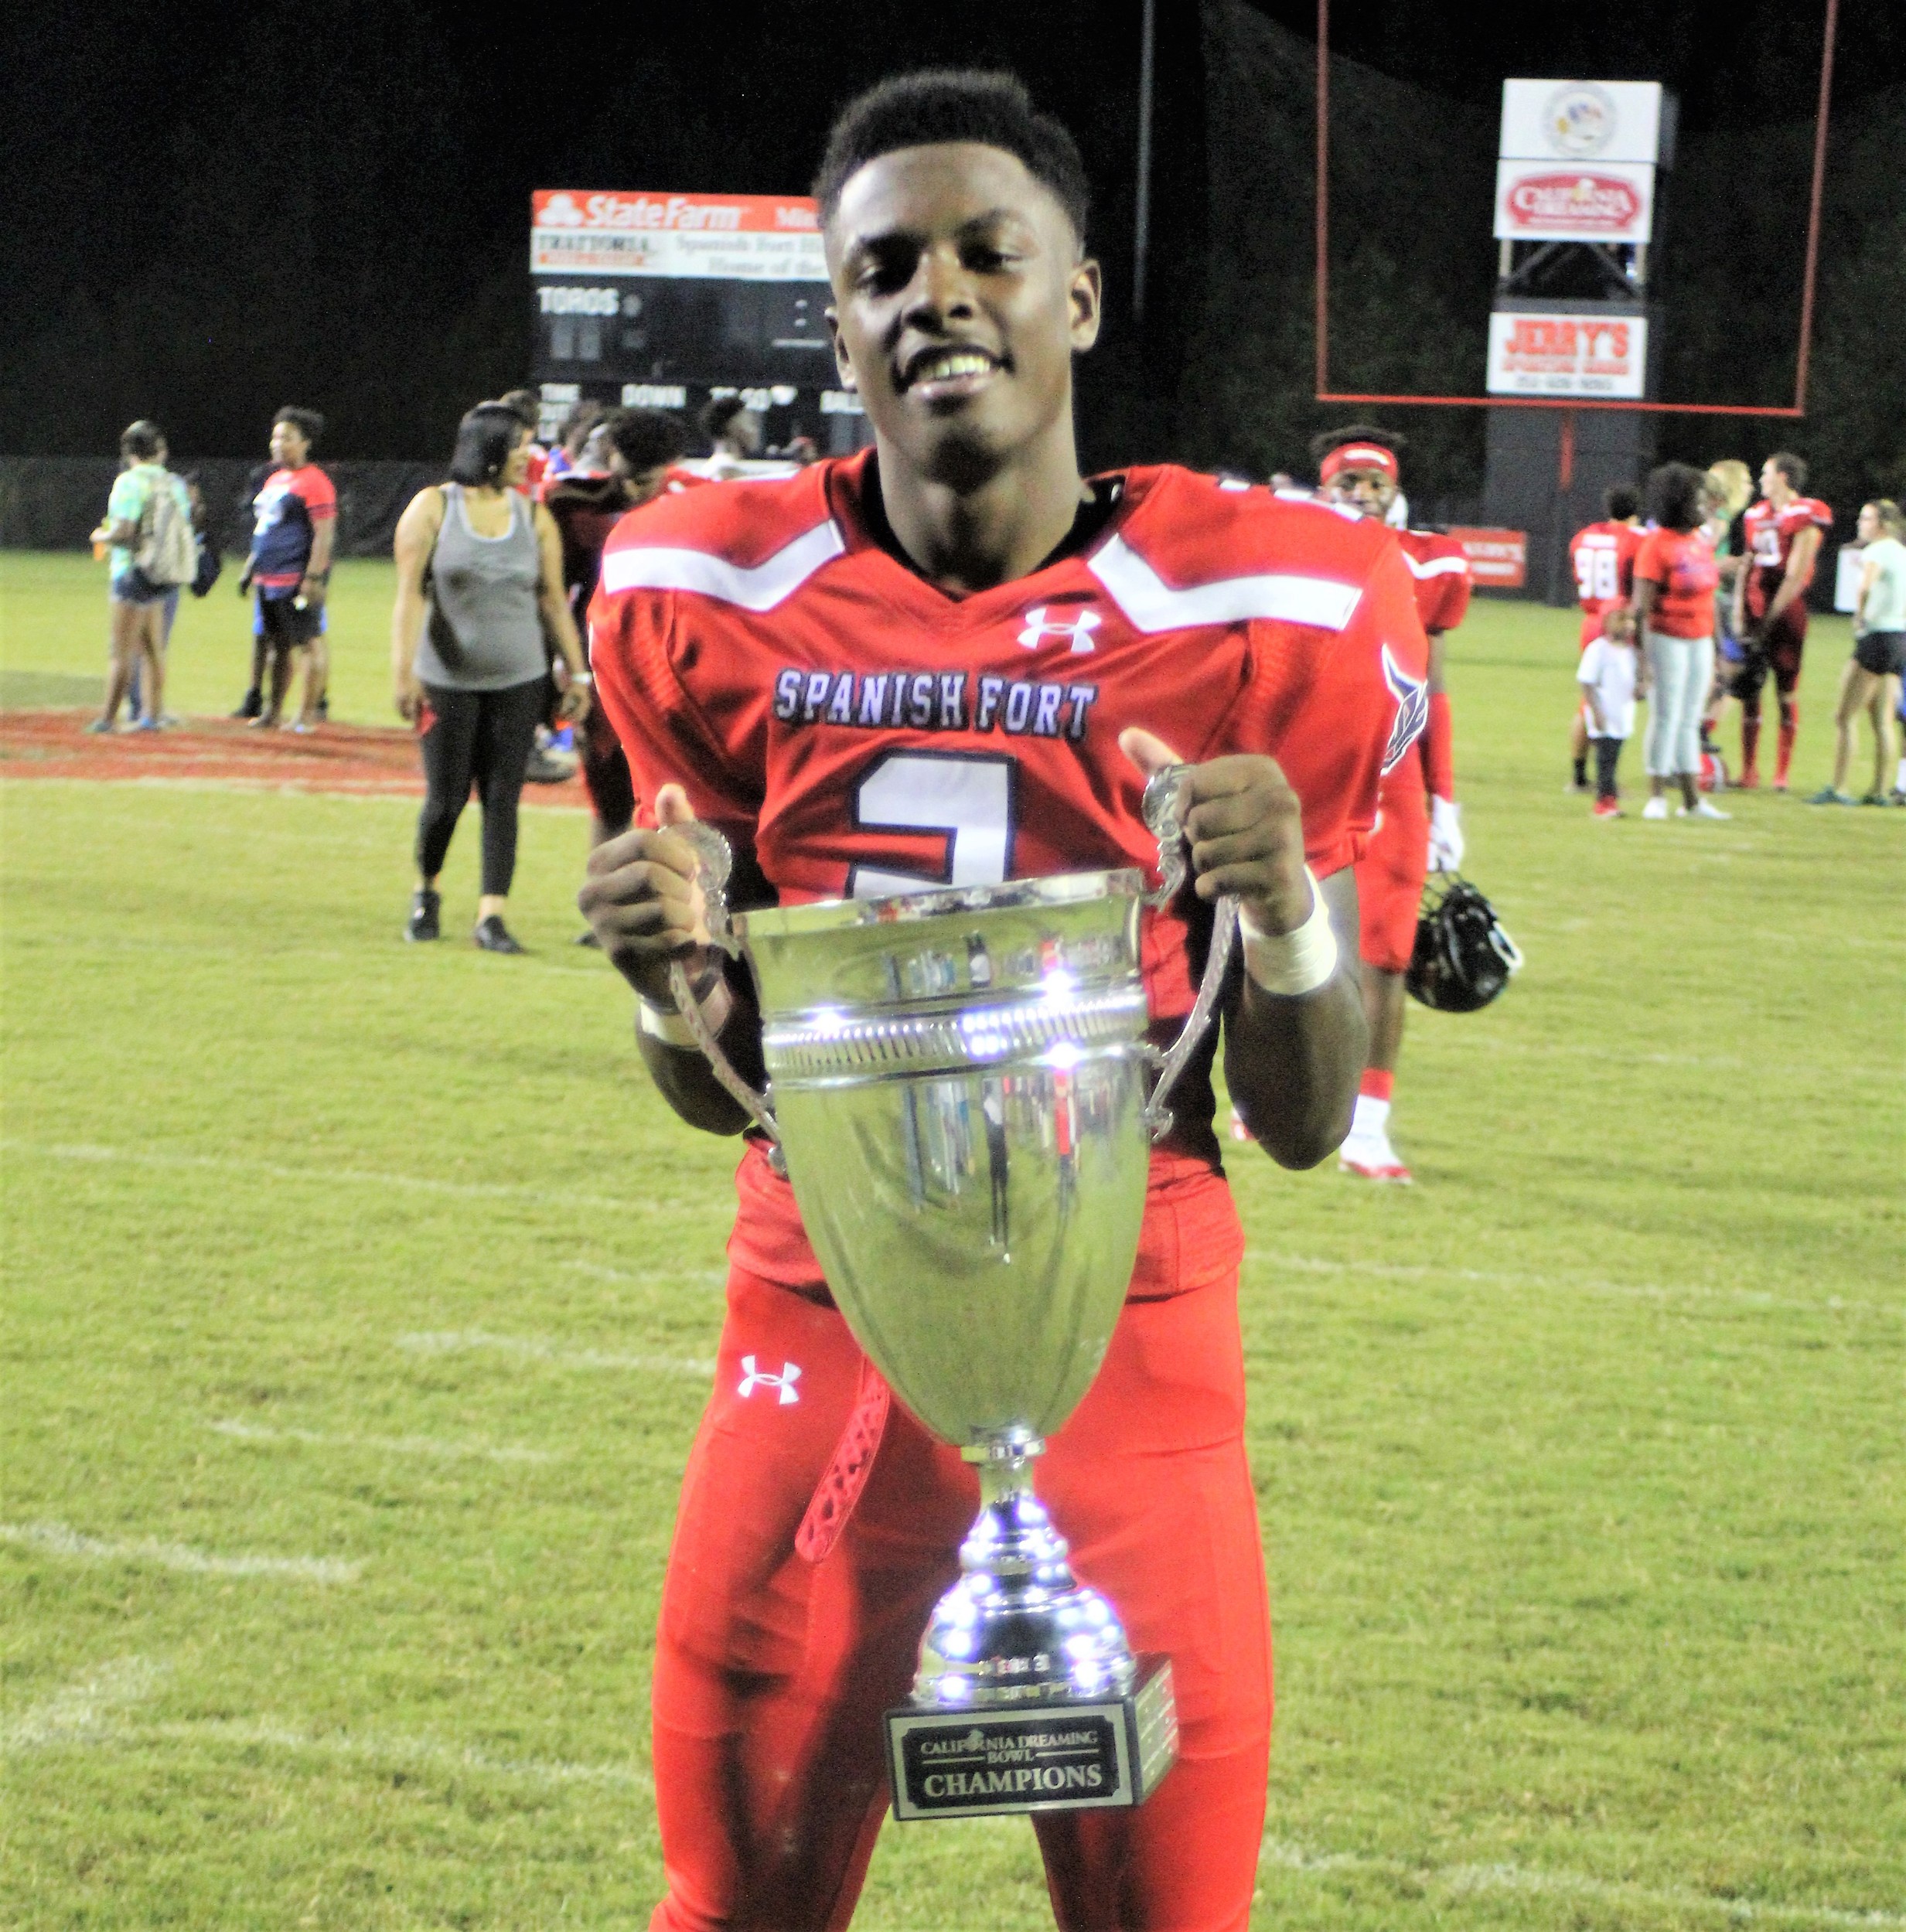 Toro cornerback Desmond (DJ) James celebrates Spanish Fort’s 22-0 win over the St. Paul’s Saints in the 2018 California Dreaming Bowl at home on Oct. 5, 2018. James is set to finish his collegiate career as an Auburn representative at the 2024 Senior Bowl at Mobile’s Hancock Whitney stadium after he officially accepted his invitation on Wednesday.